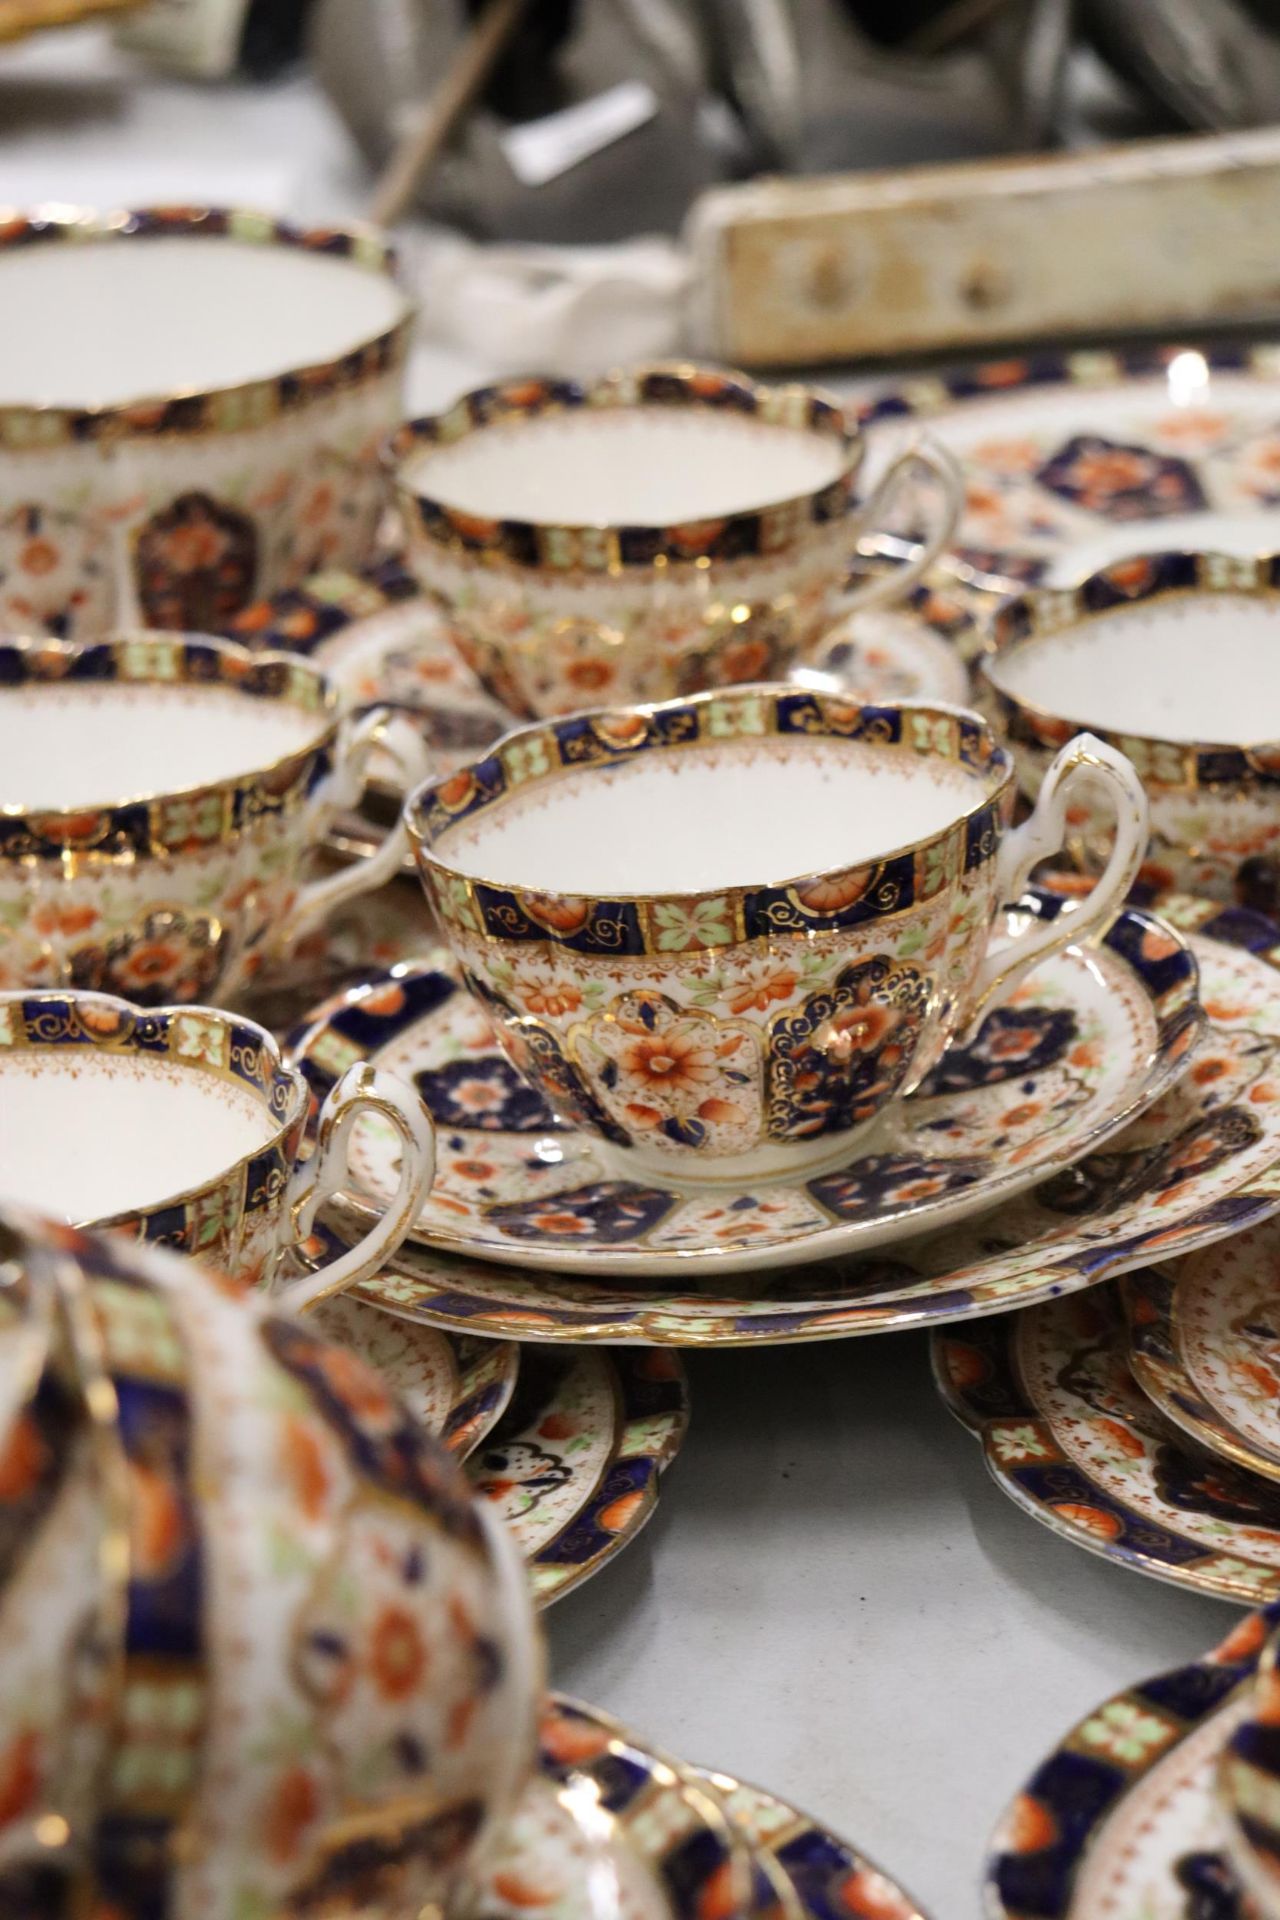 AN ANTIQUE 'COURT CHINA' TEASET TO INCLUDE CAKE PLATES, CUPS, SAUCERS, SIDE PLATES AND A SUGAR BOWL - Bild 3 aus 9